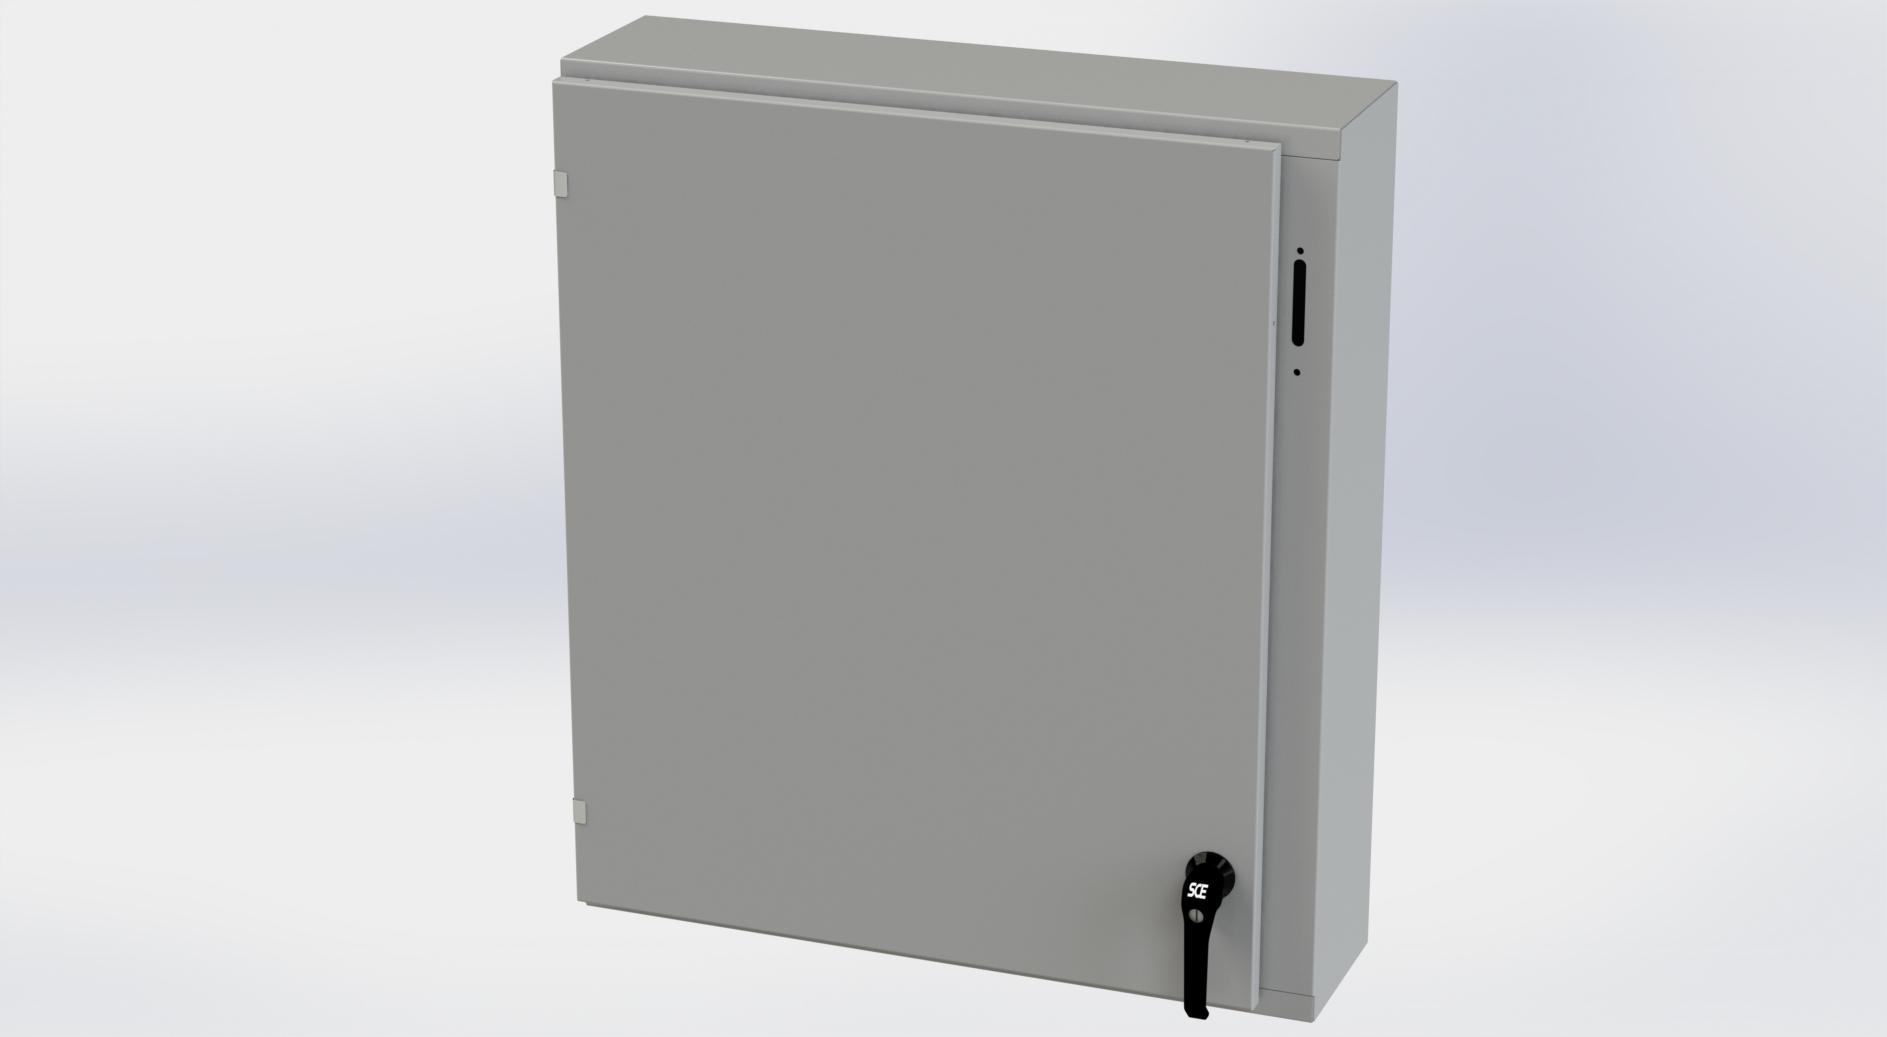 Saginaw Control SCE-36XEL3108LP XEL LP Enclosure, Height:36.00", Width:31.38", Depth:8.00", ANSI-61 gray powder coating inside and out. Optional sub-panels are powder coated white.